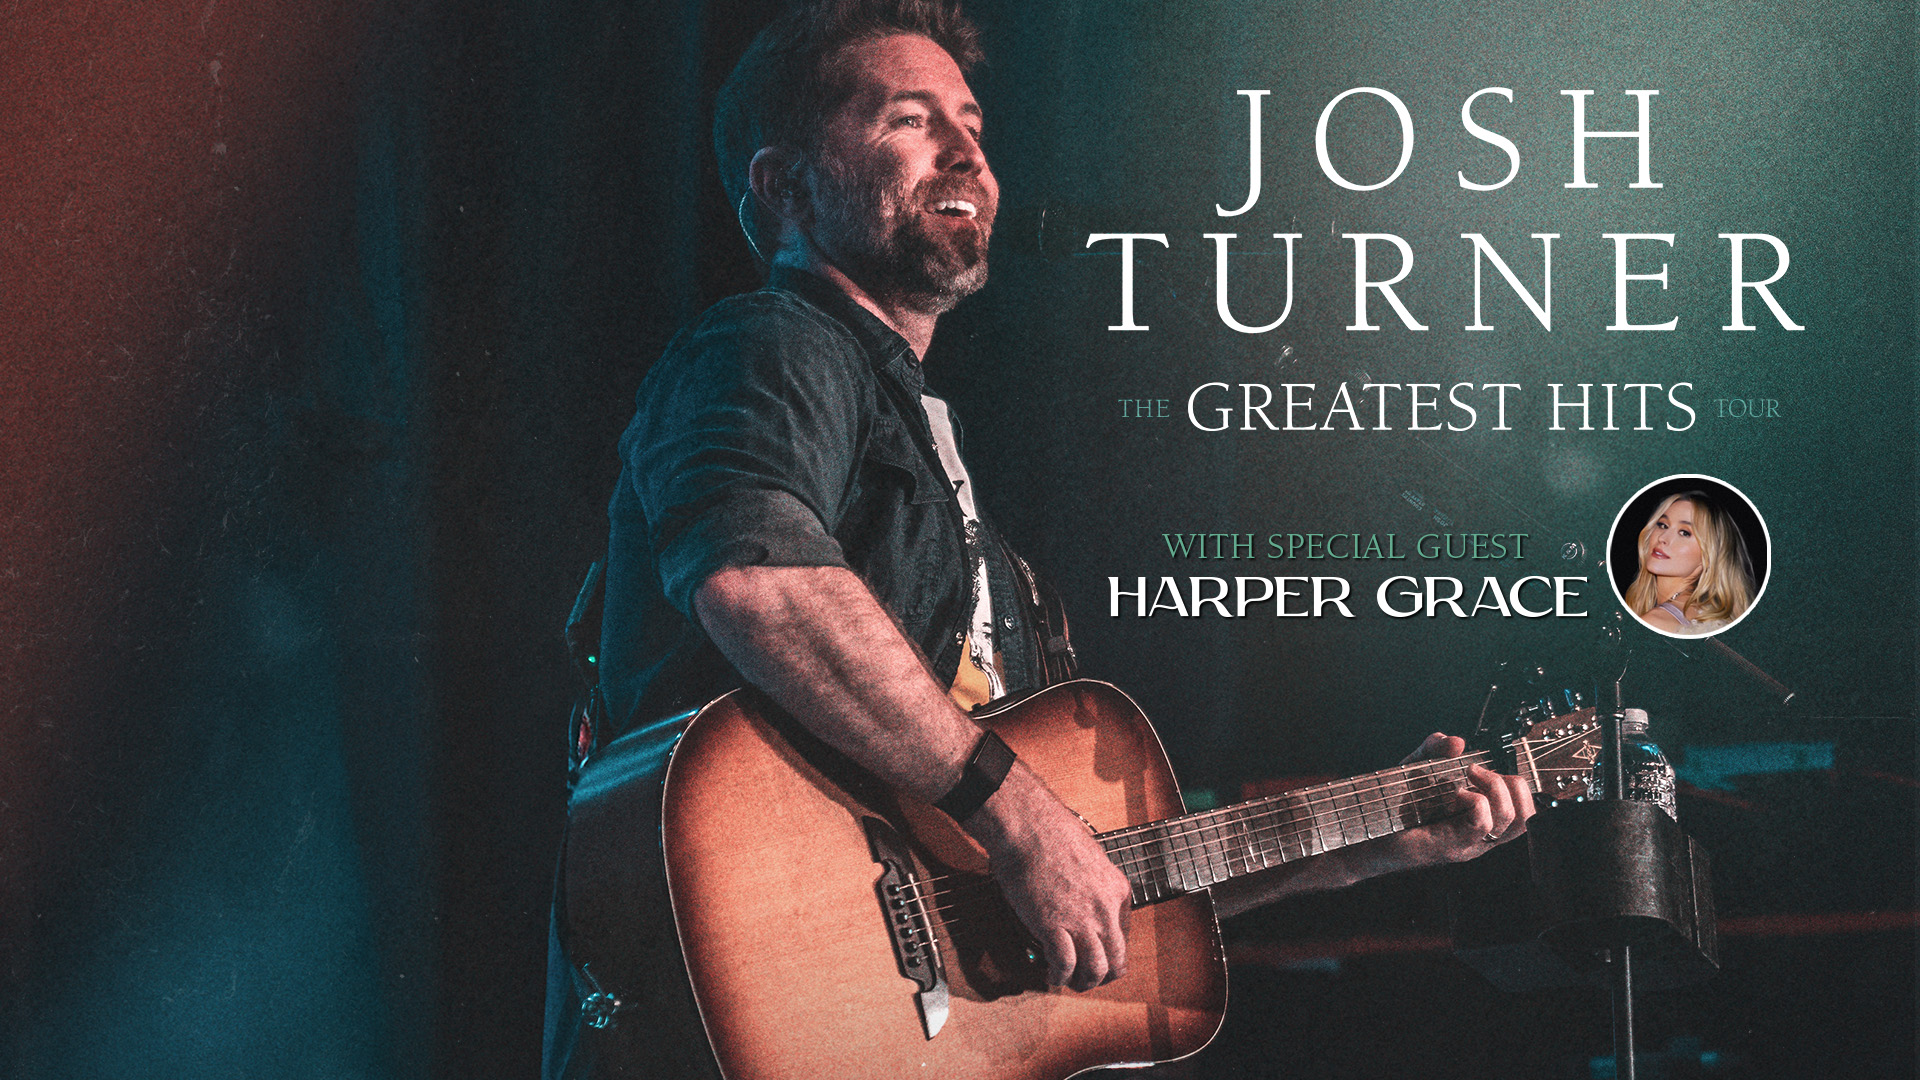 Josh Turner: The Greatest Hits Tour with special guest Harper Grace